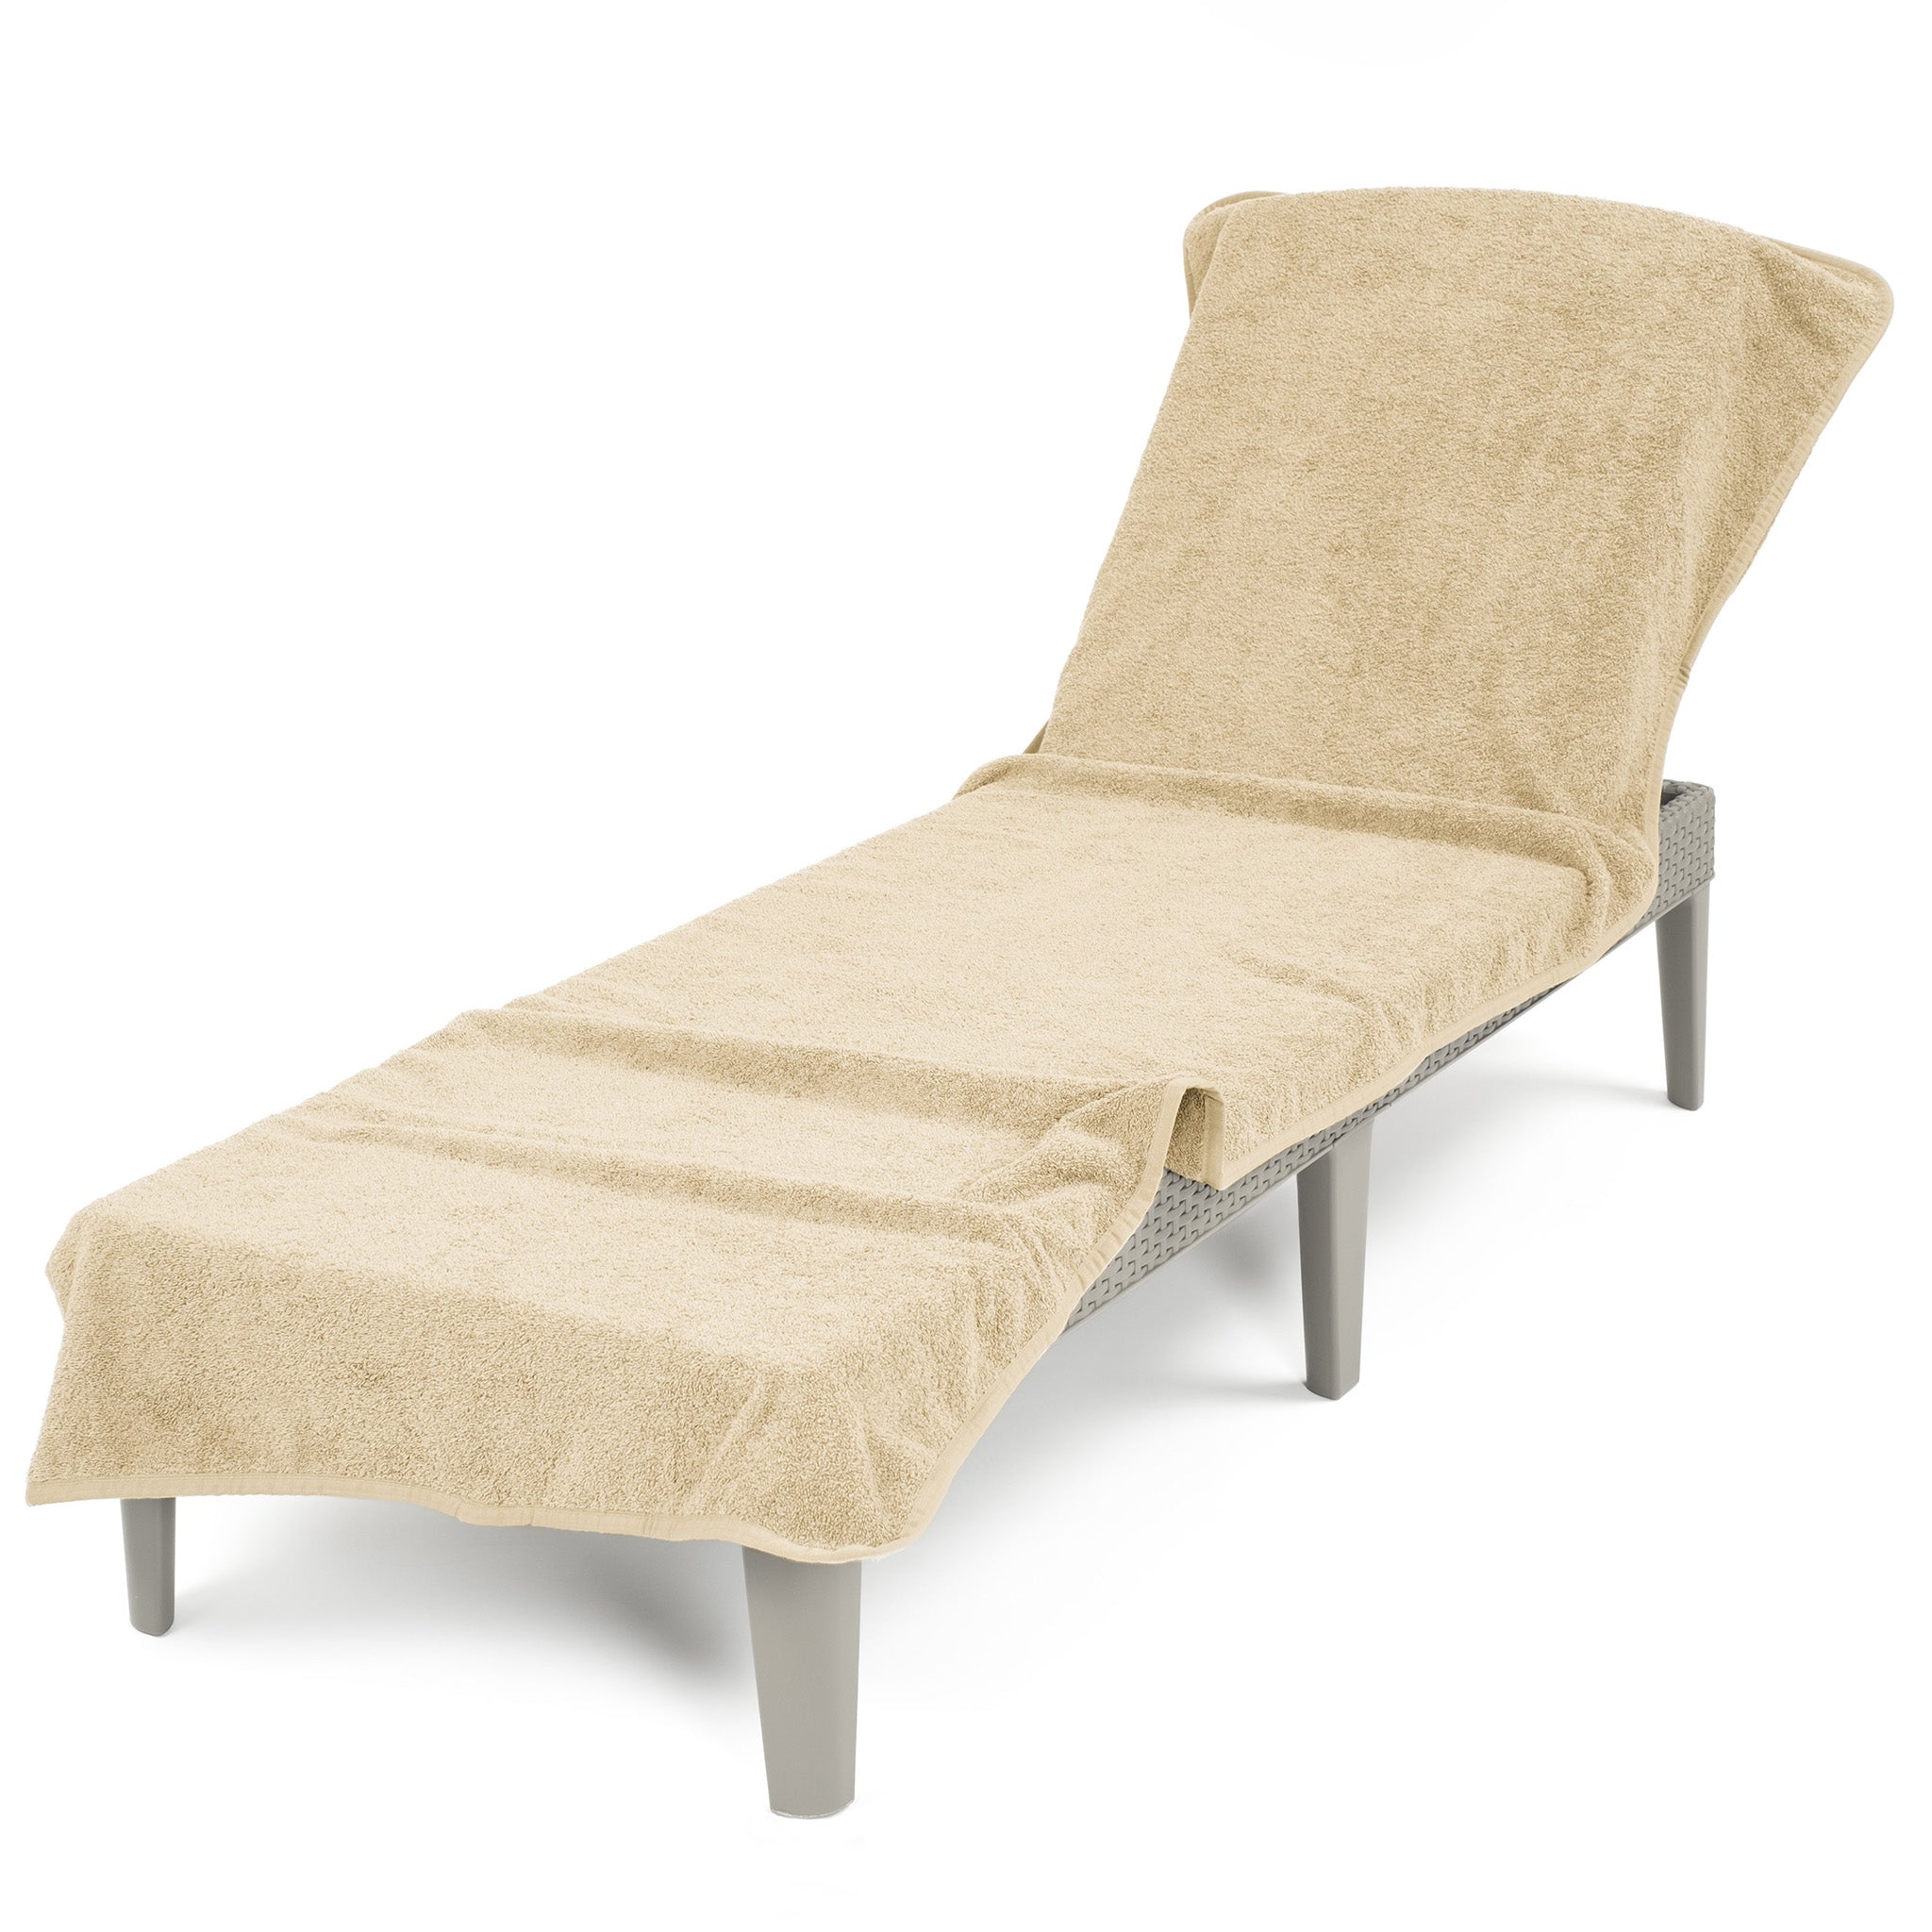 American Soft Linen - Chaise Lounge Covers Towel - 16 Set Case Pack - Sand-Taupe - 4